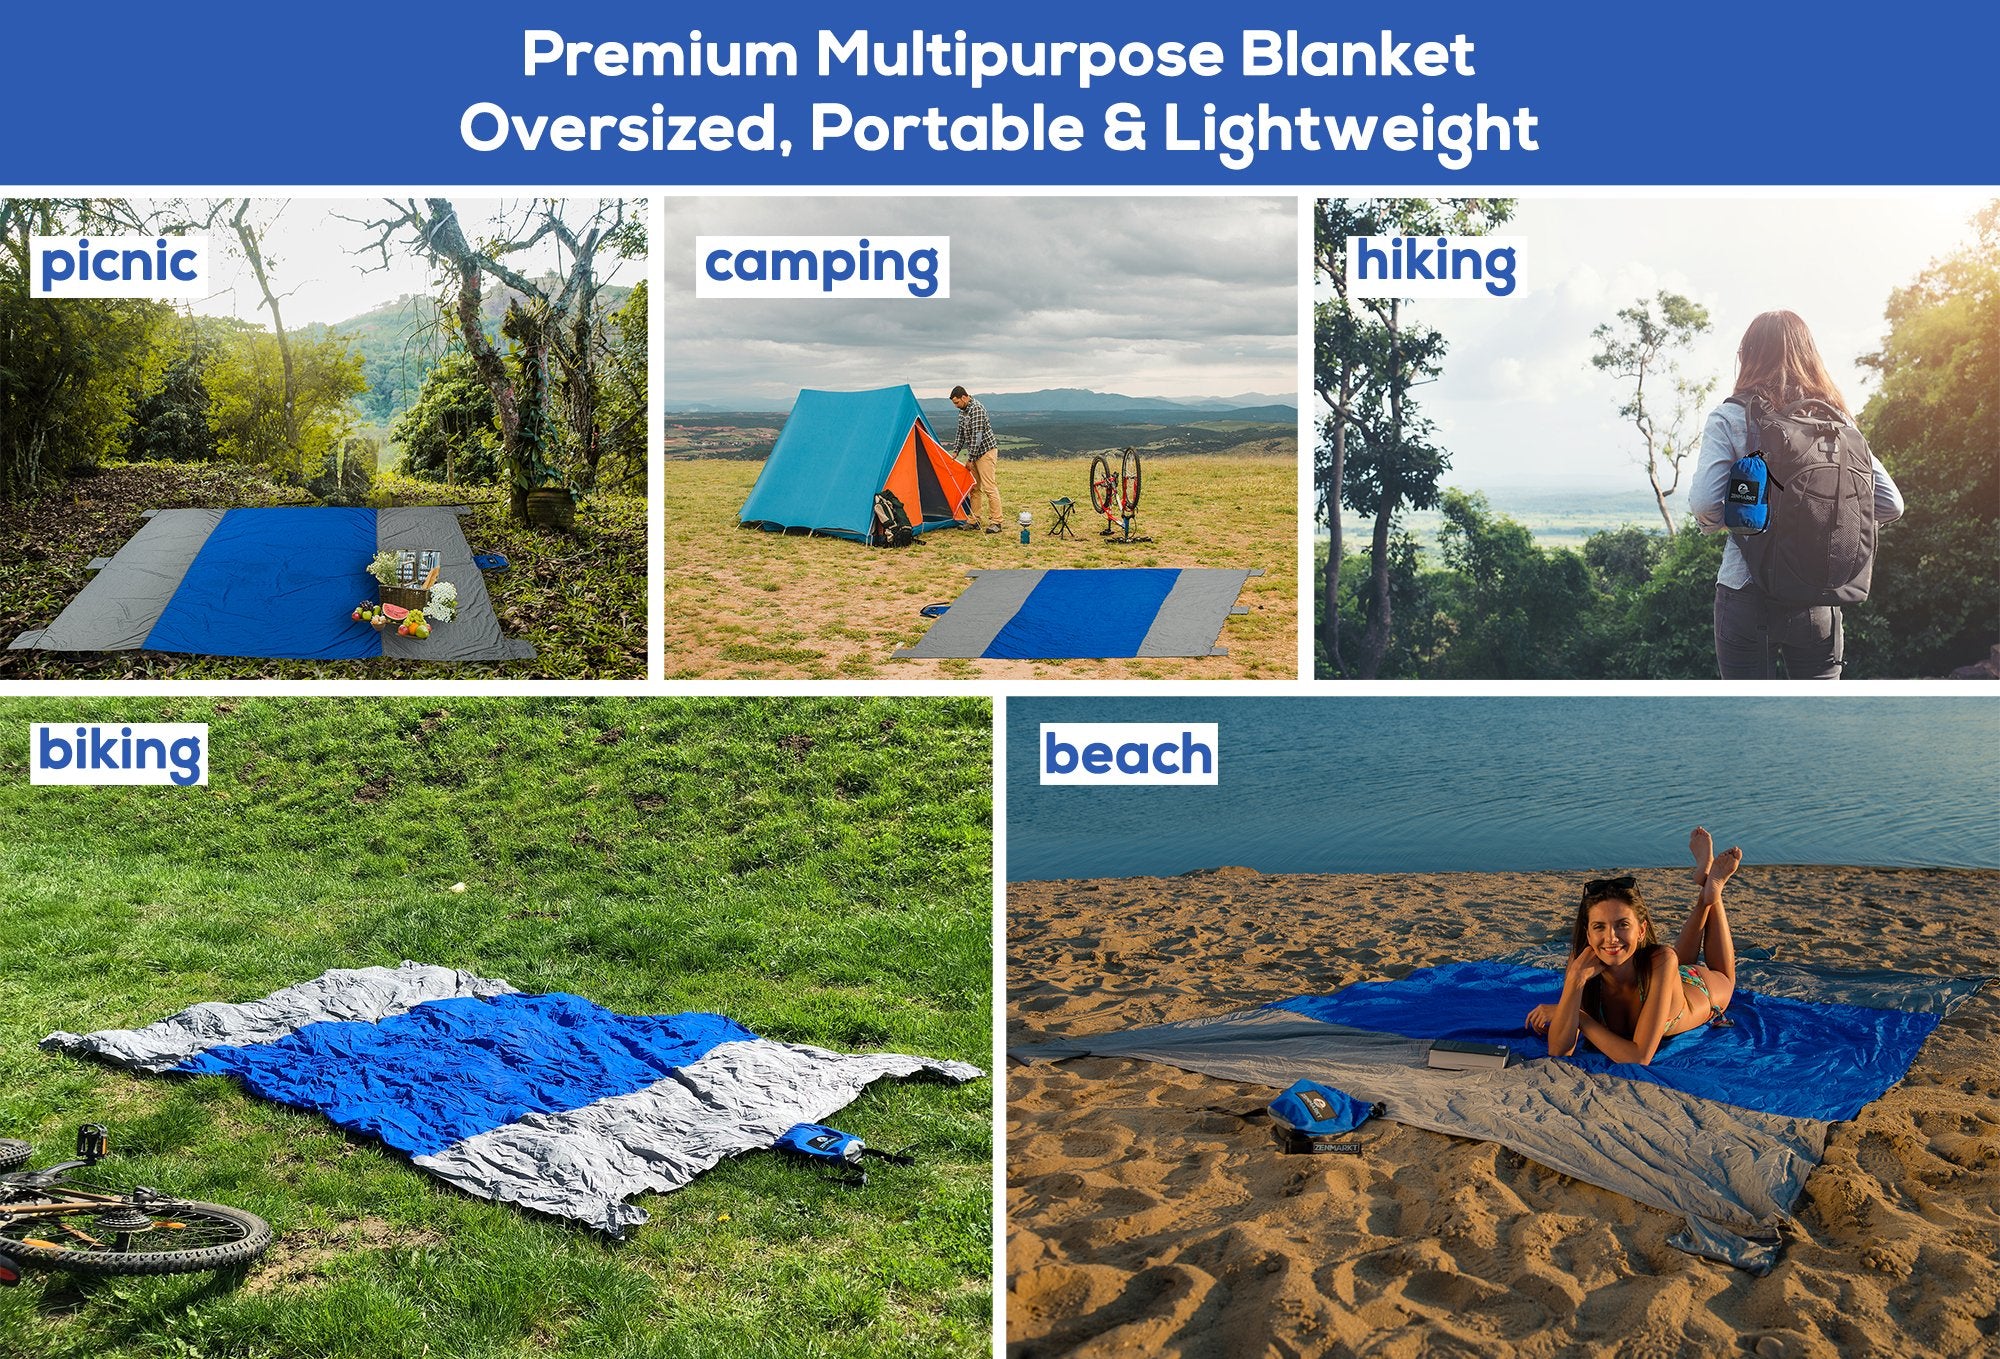 Sand Free Beach Blanket - Outdoor Travel Blanket - 9'X7' Sandproof Water/Wind Resistant Parachute Nylon Picnic Blanket For Picnic, Hiking Gear, Camping Beach Gear - No Sand Beach Mat